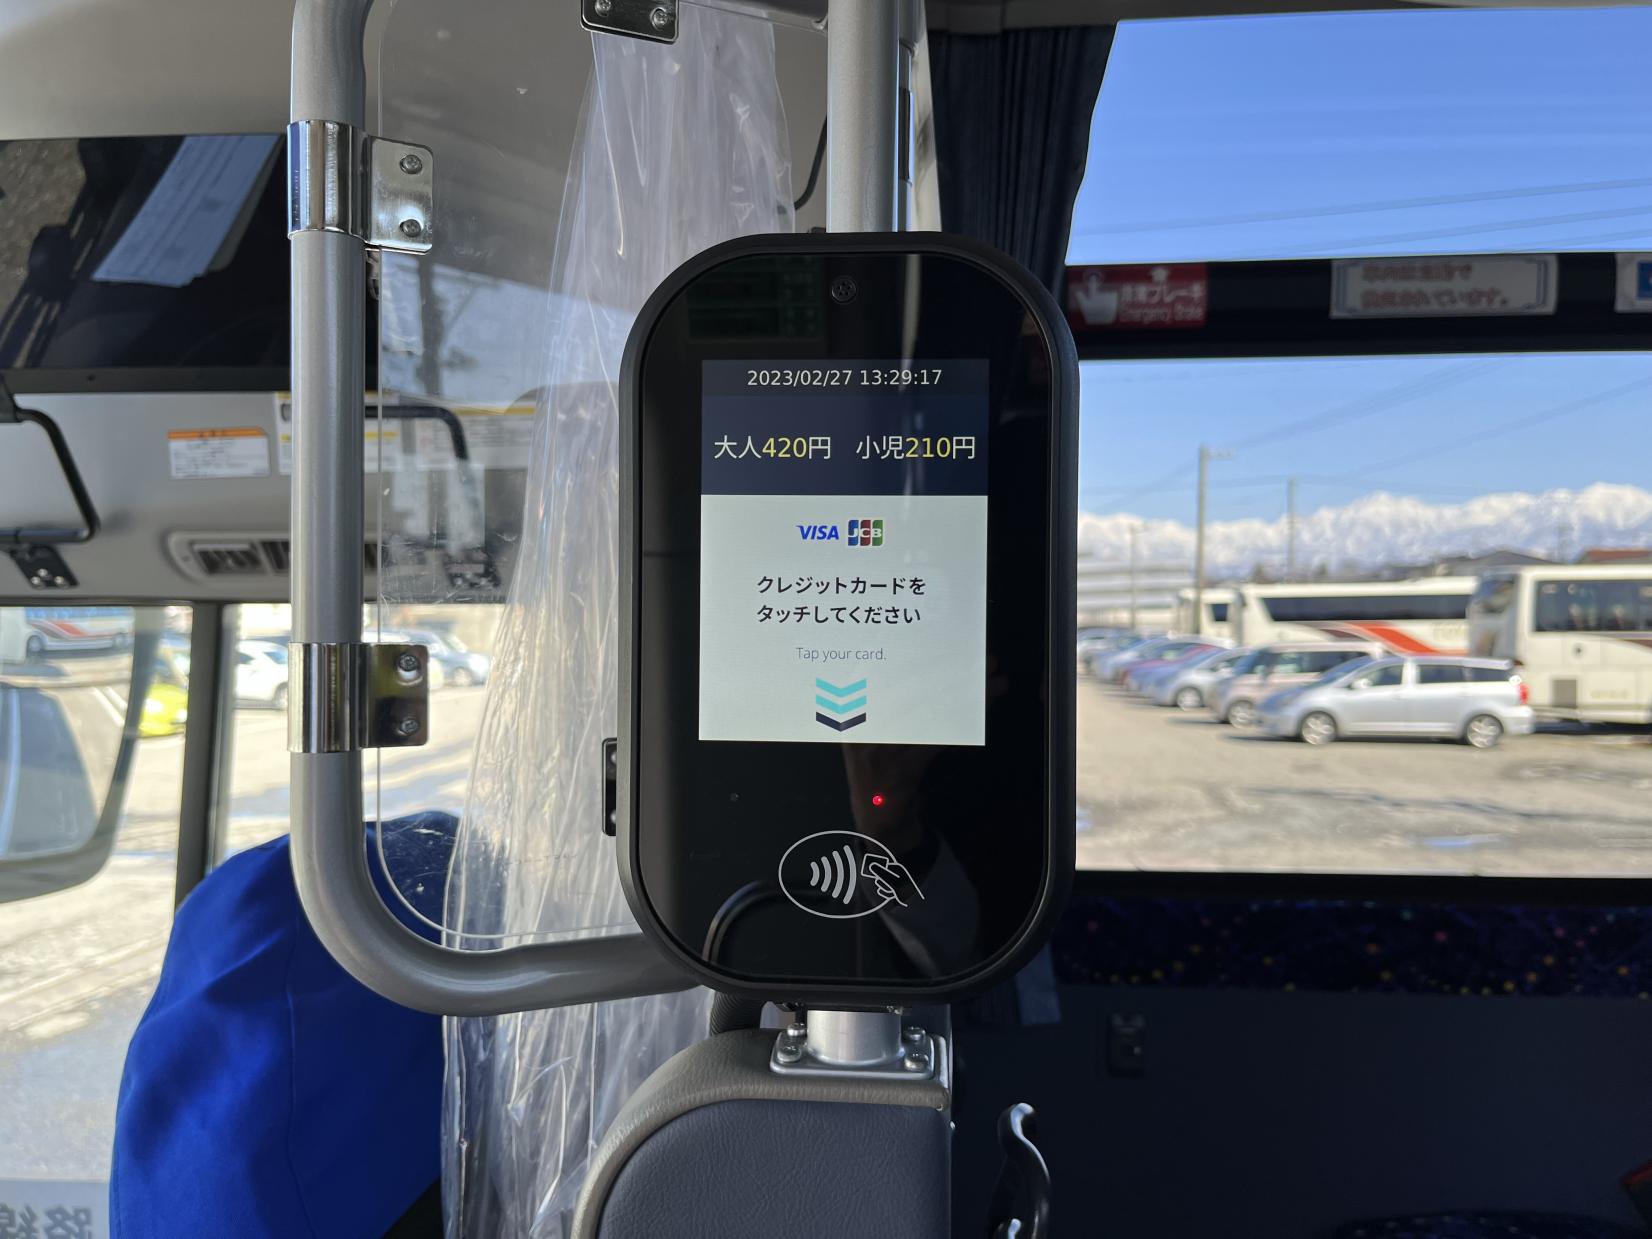 Visa and JCB touch payment is now available for Toyama Airport direct buses!-1